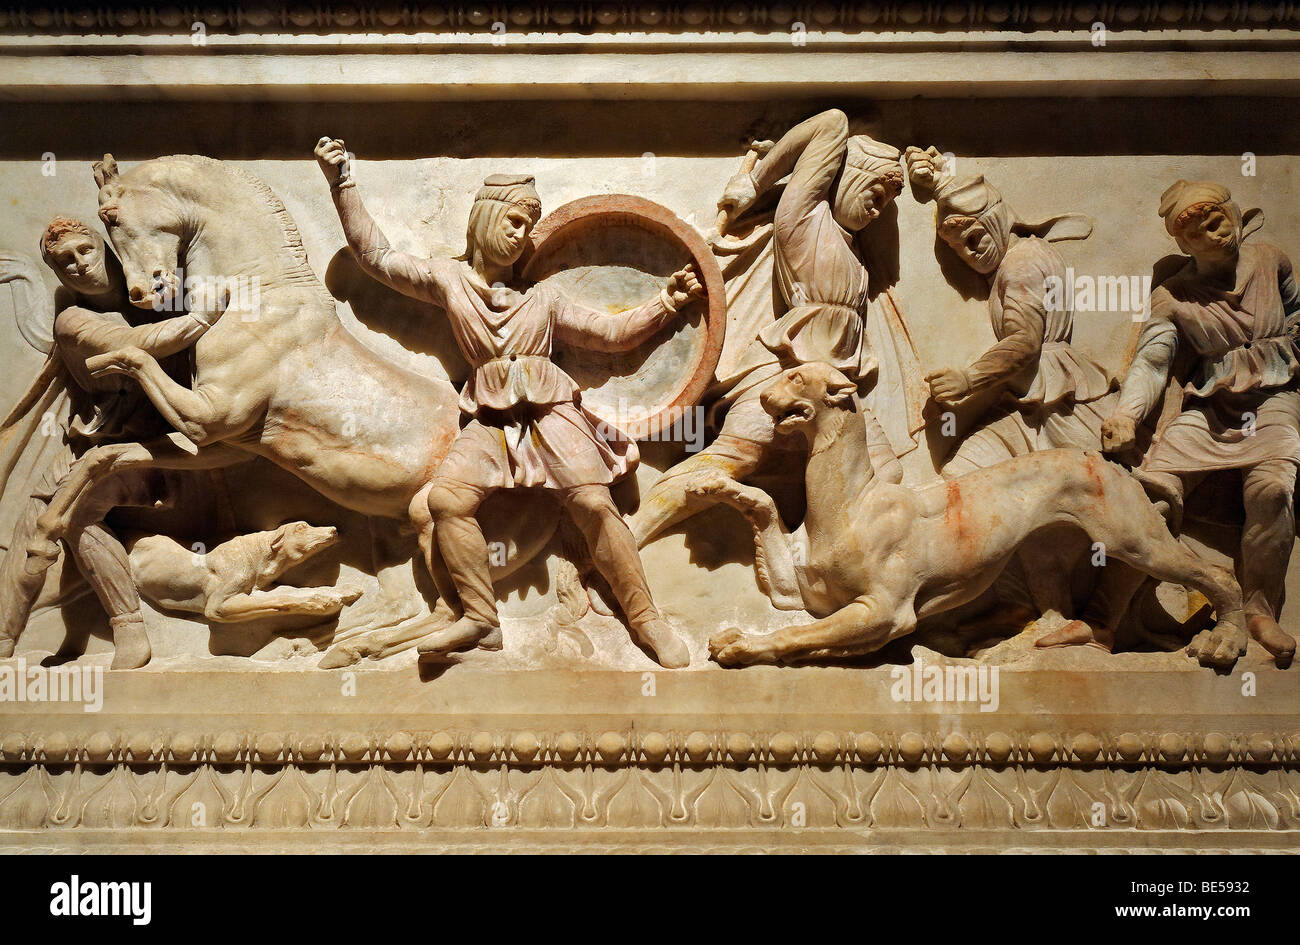 Alexander sarcophagus, relief with warriors fighting against the Persians, detail, Archeological Museum, Topkapi Palace, Istanb Stock Photo